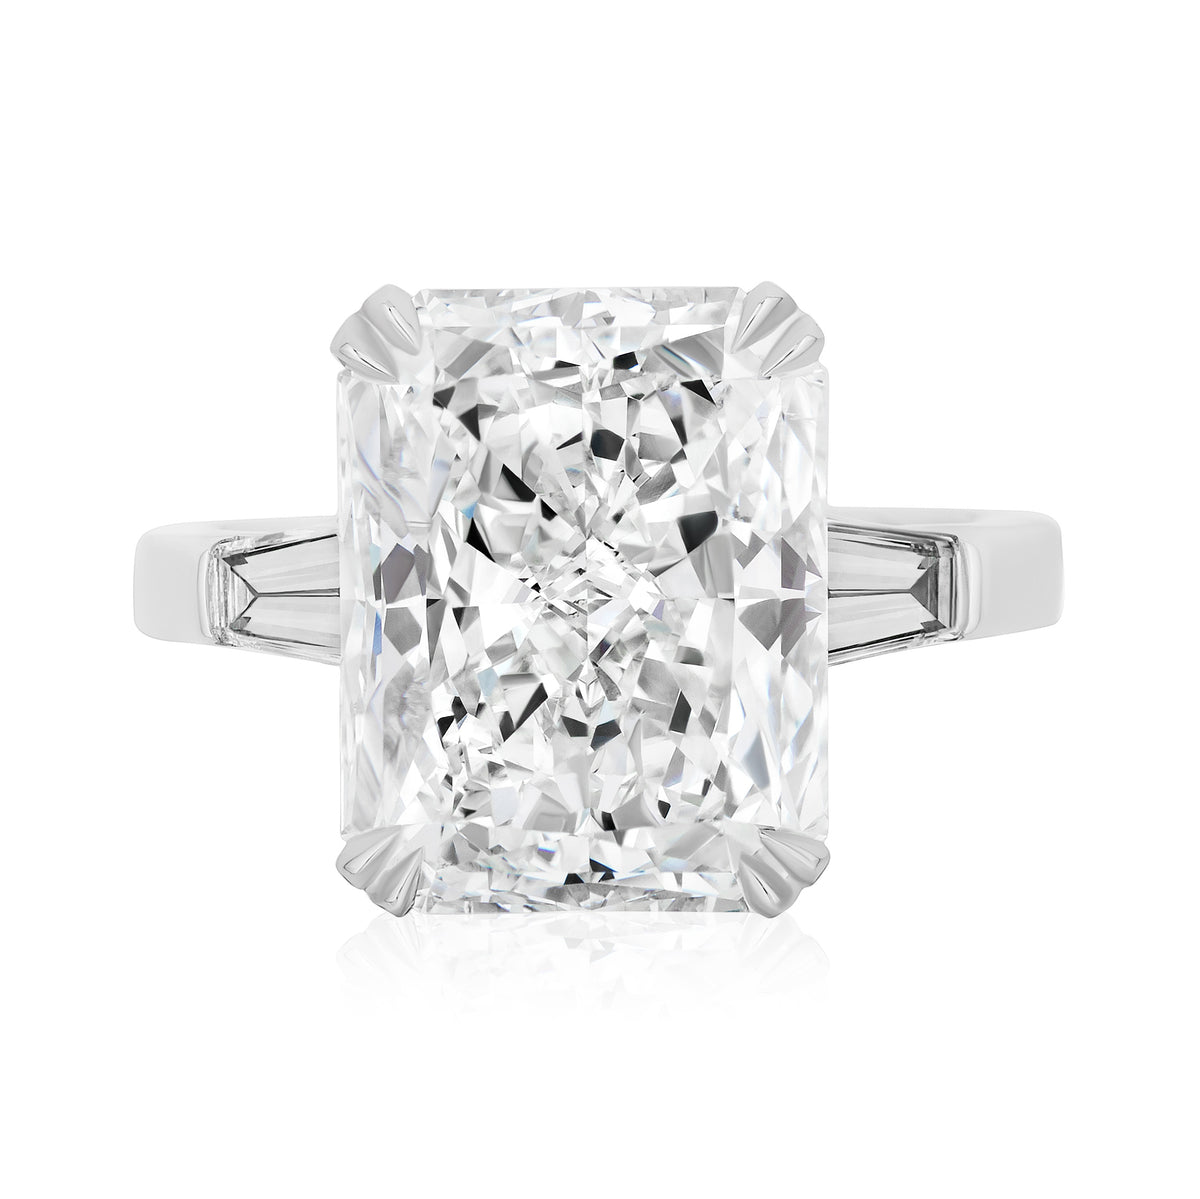 Radiant Cut Diamond with Tapered Baguettes